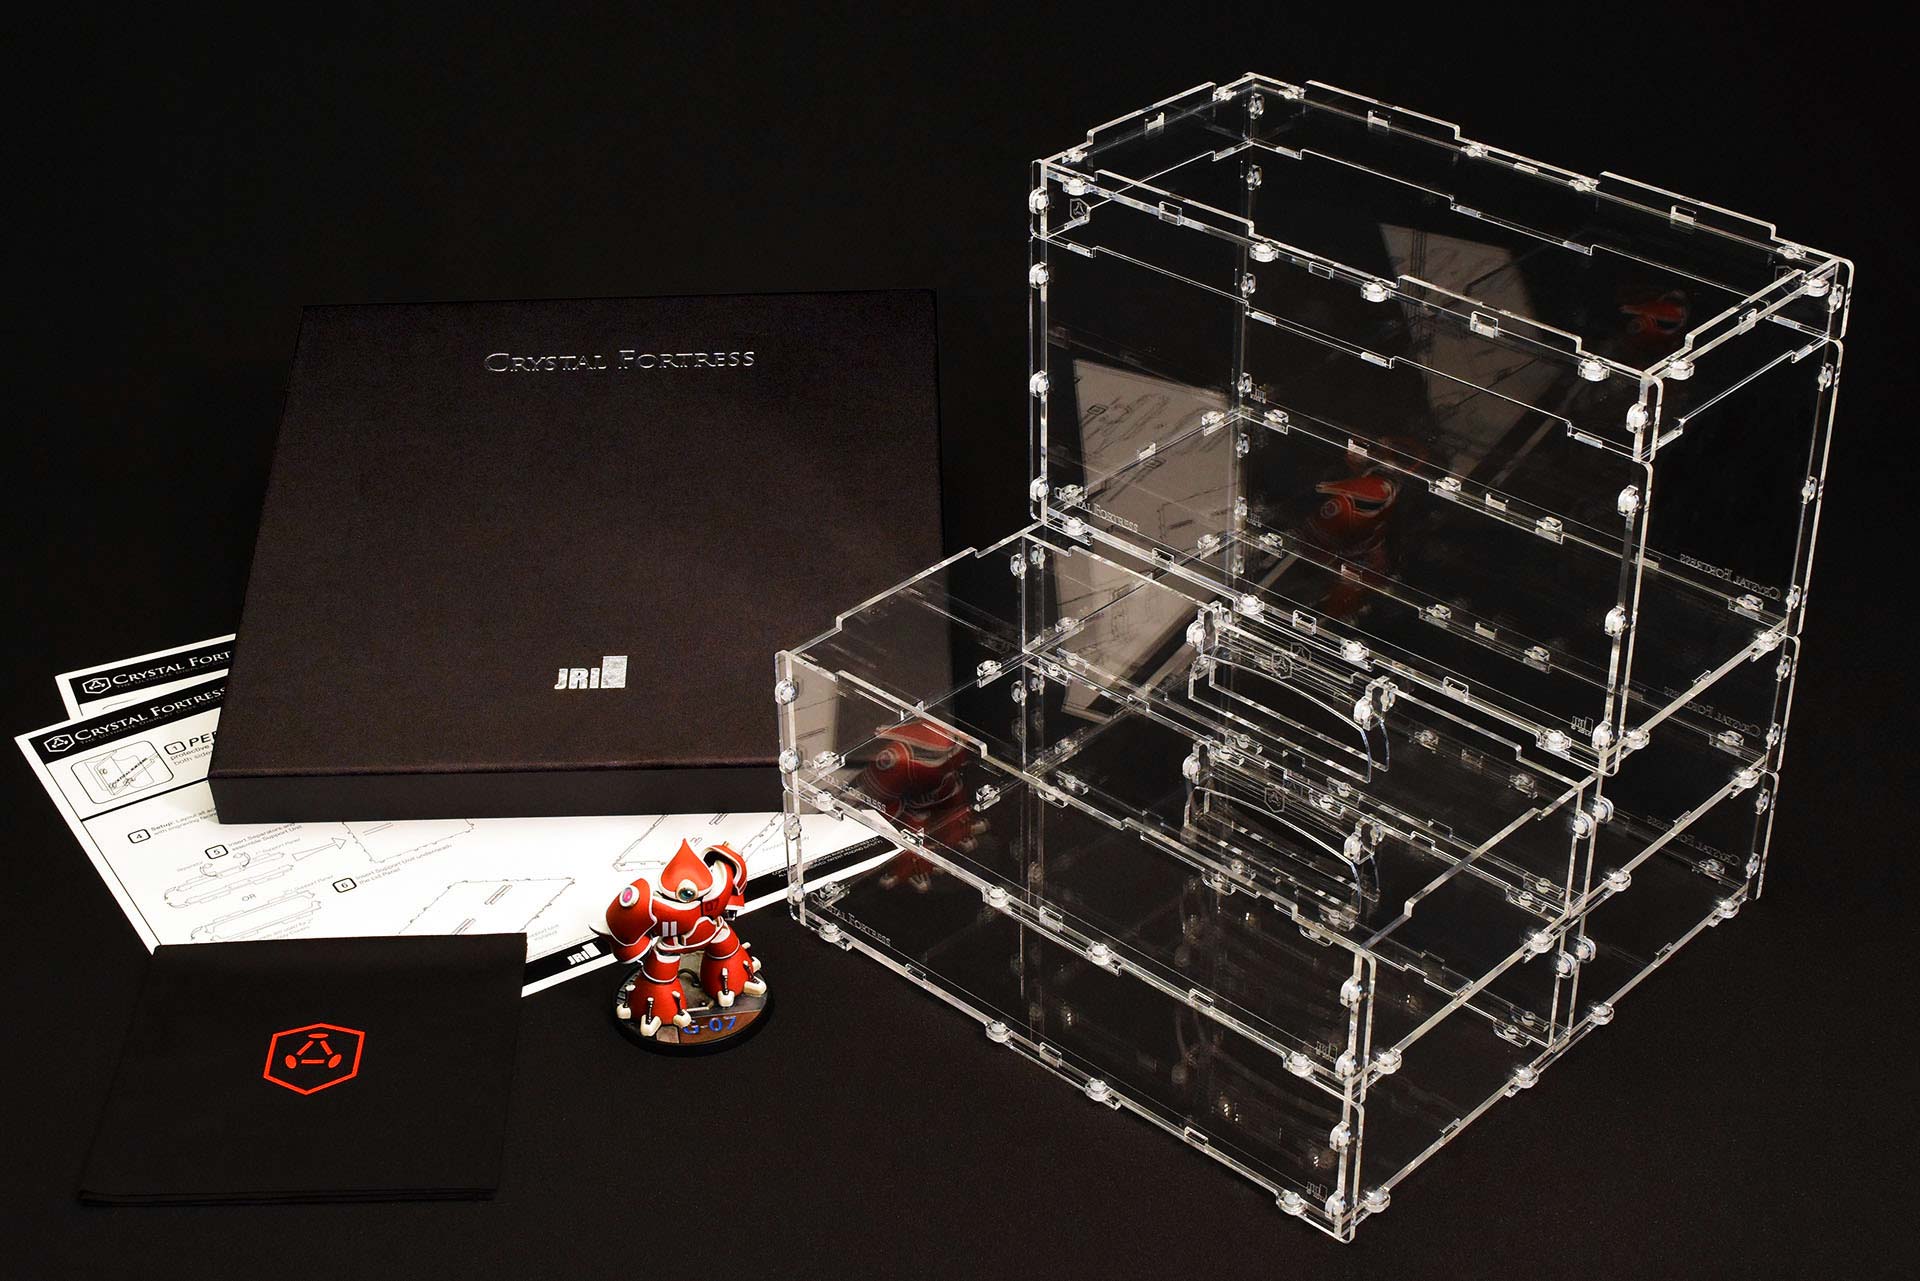 Fortress 3/4 Cube, Acrylic Display Case for Miniatures and Models